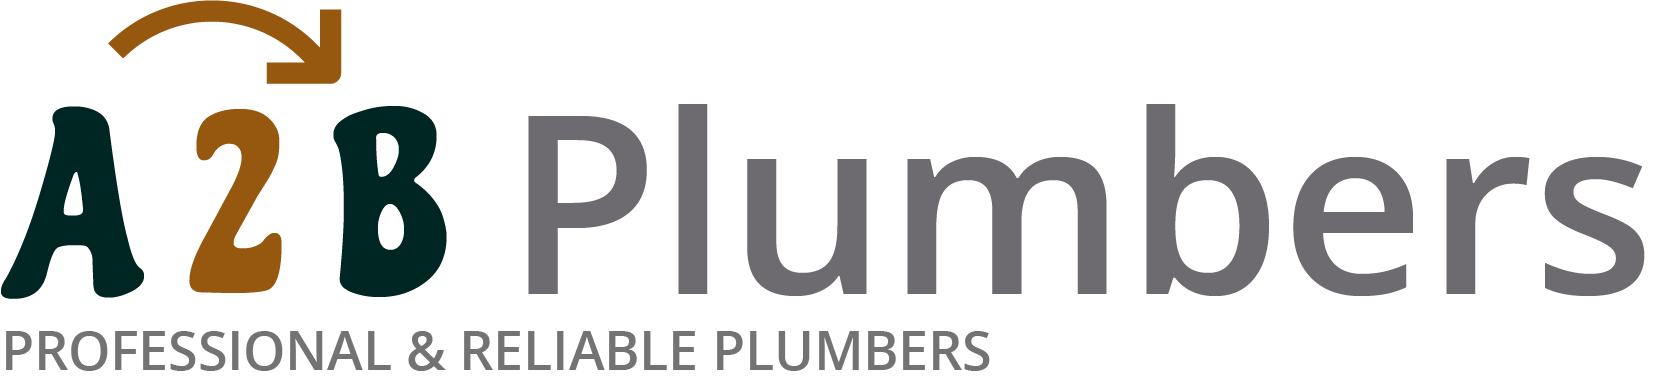 If you need a boiler installed, a radiator repaired or a leaking tap fixed, call us now - we provide services for properties in Prudhoe and the local area.